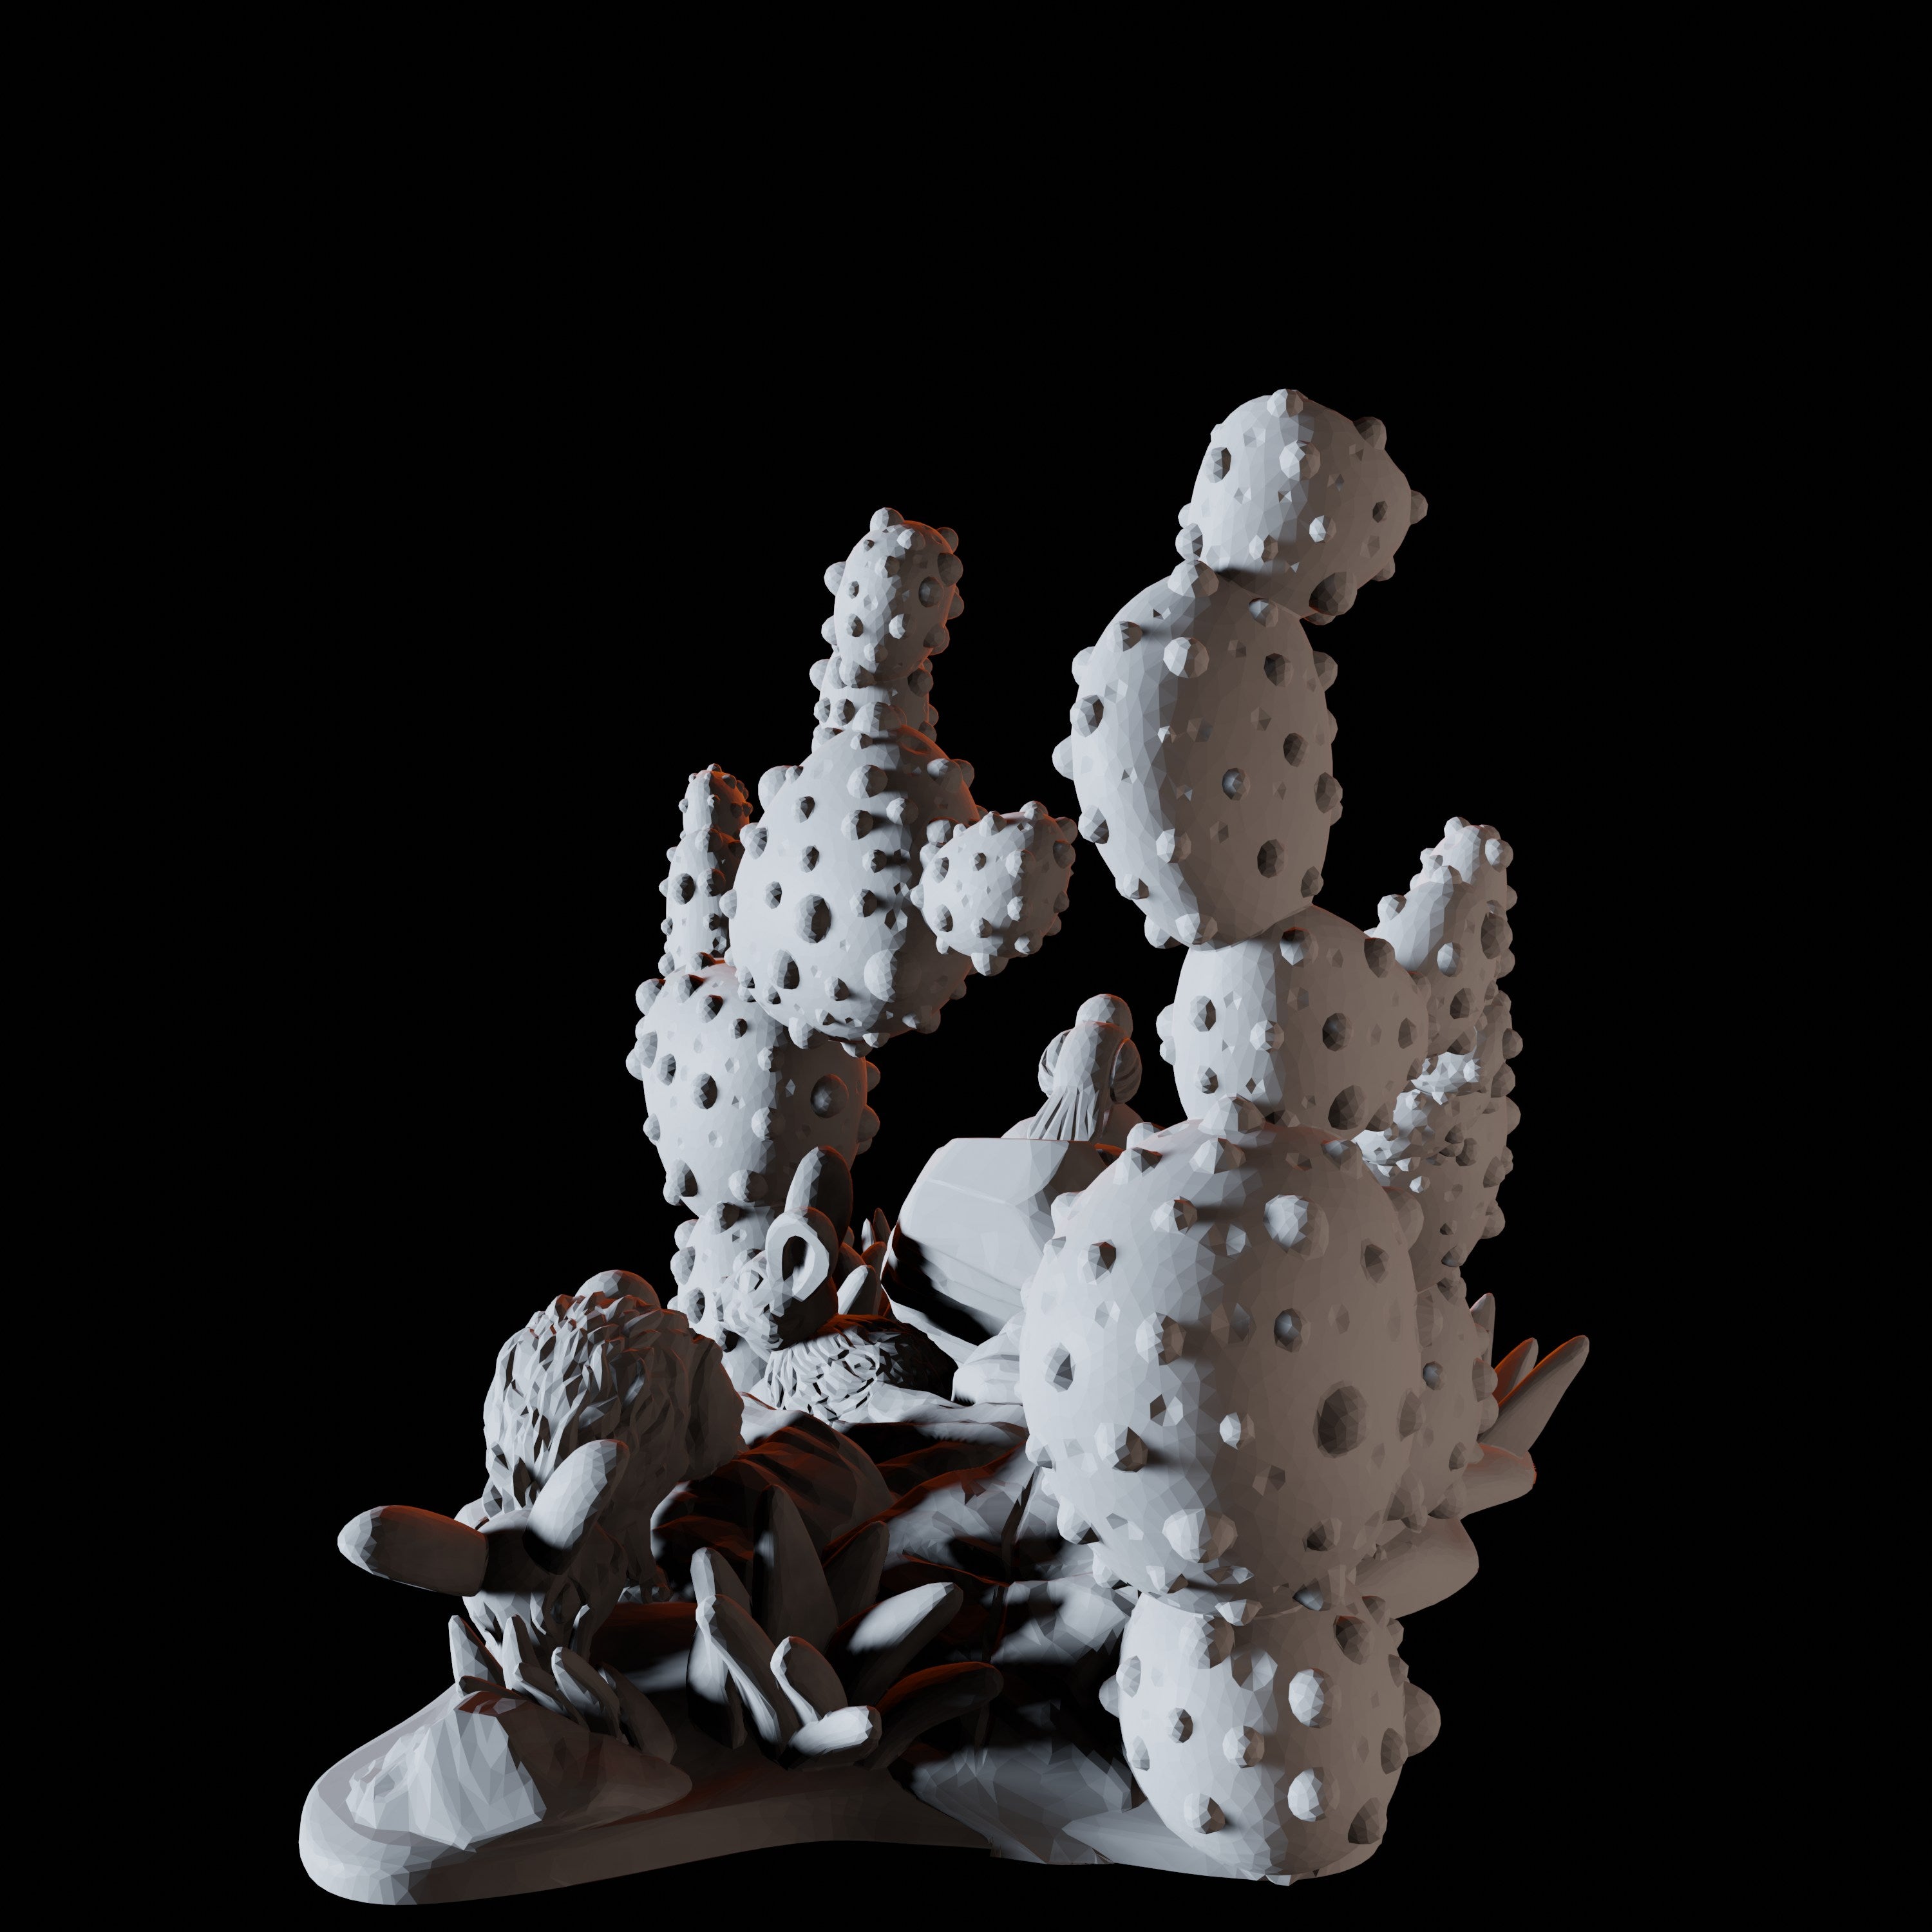 Cactus and Bunny Rabbits - Desert Scatter Terrain Miniature for Dungeons and Dragons - Myth Forged